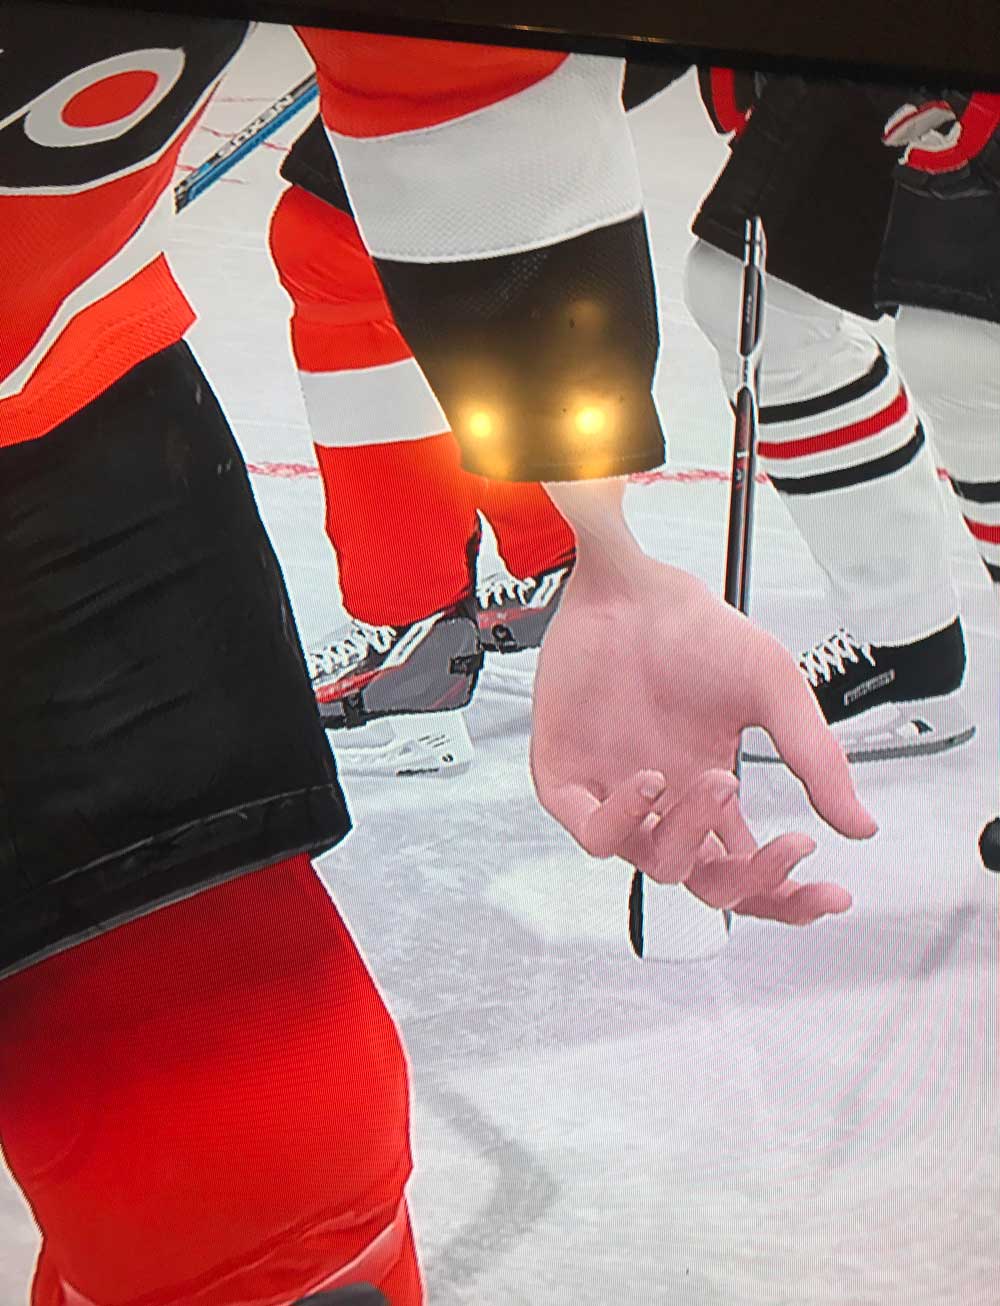 I was playing NHL 19 and a player on the opposing team dropped his gloves. This was his wrist